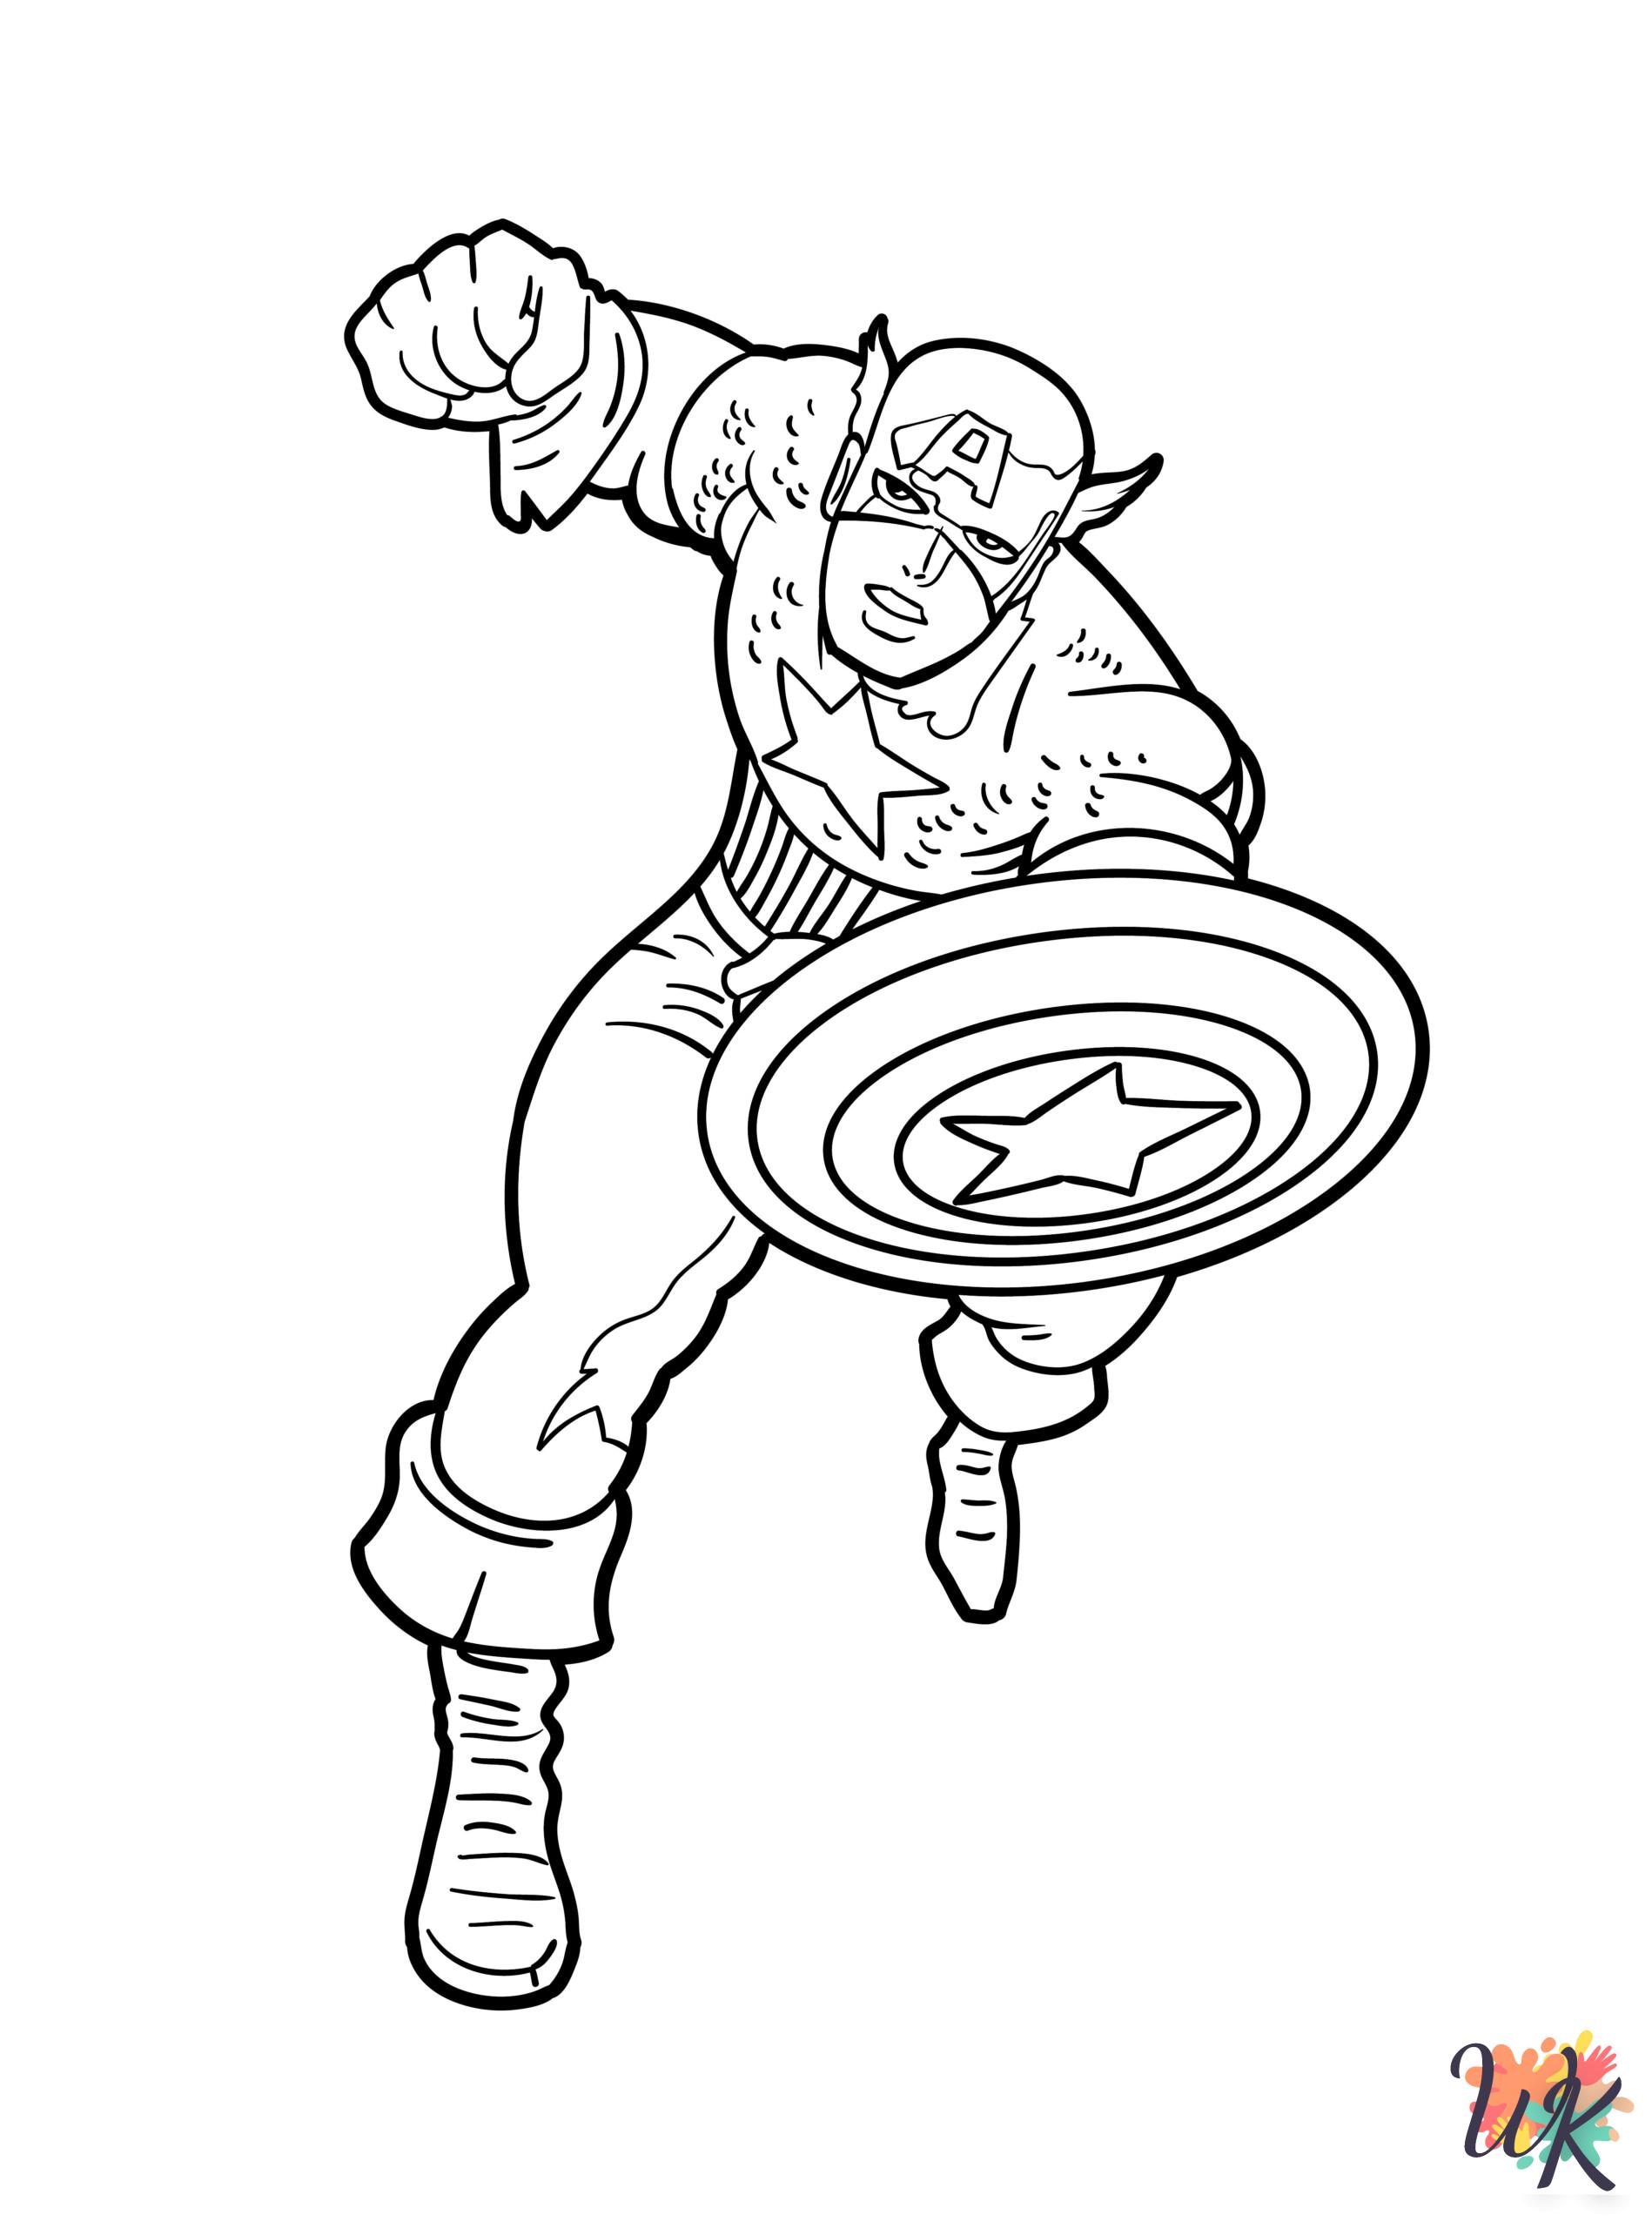 Superhero coloring pages printable free